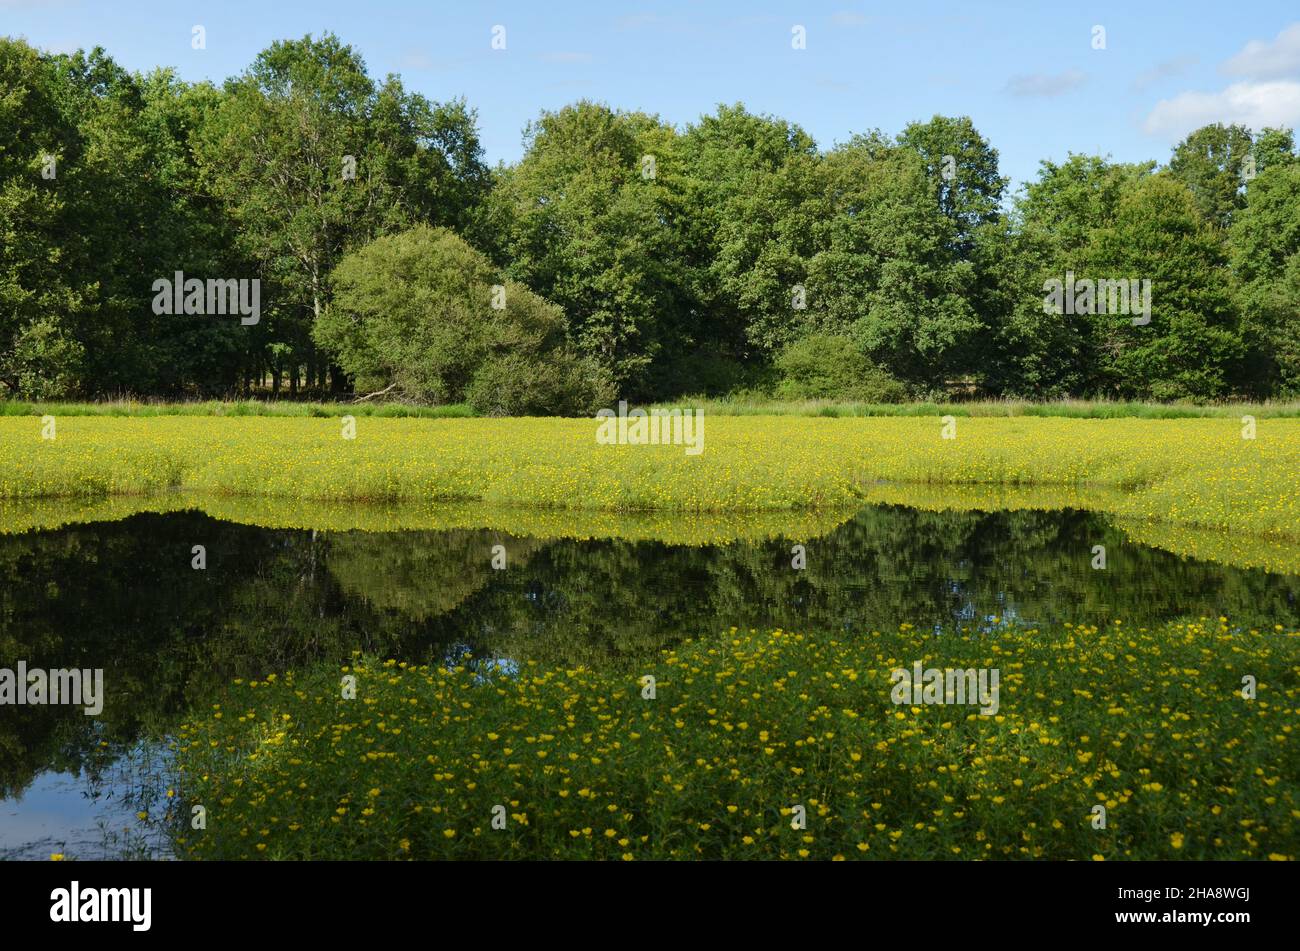 A peaceful countryside picture near the village of Marcilly en Gault in the naural Sologne region. Stock Photo